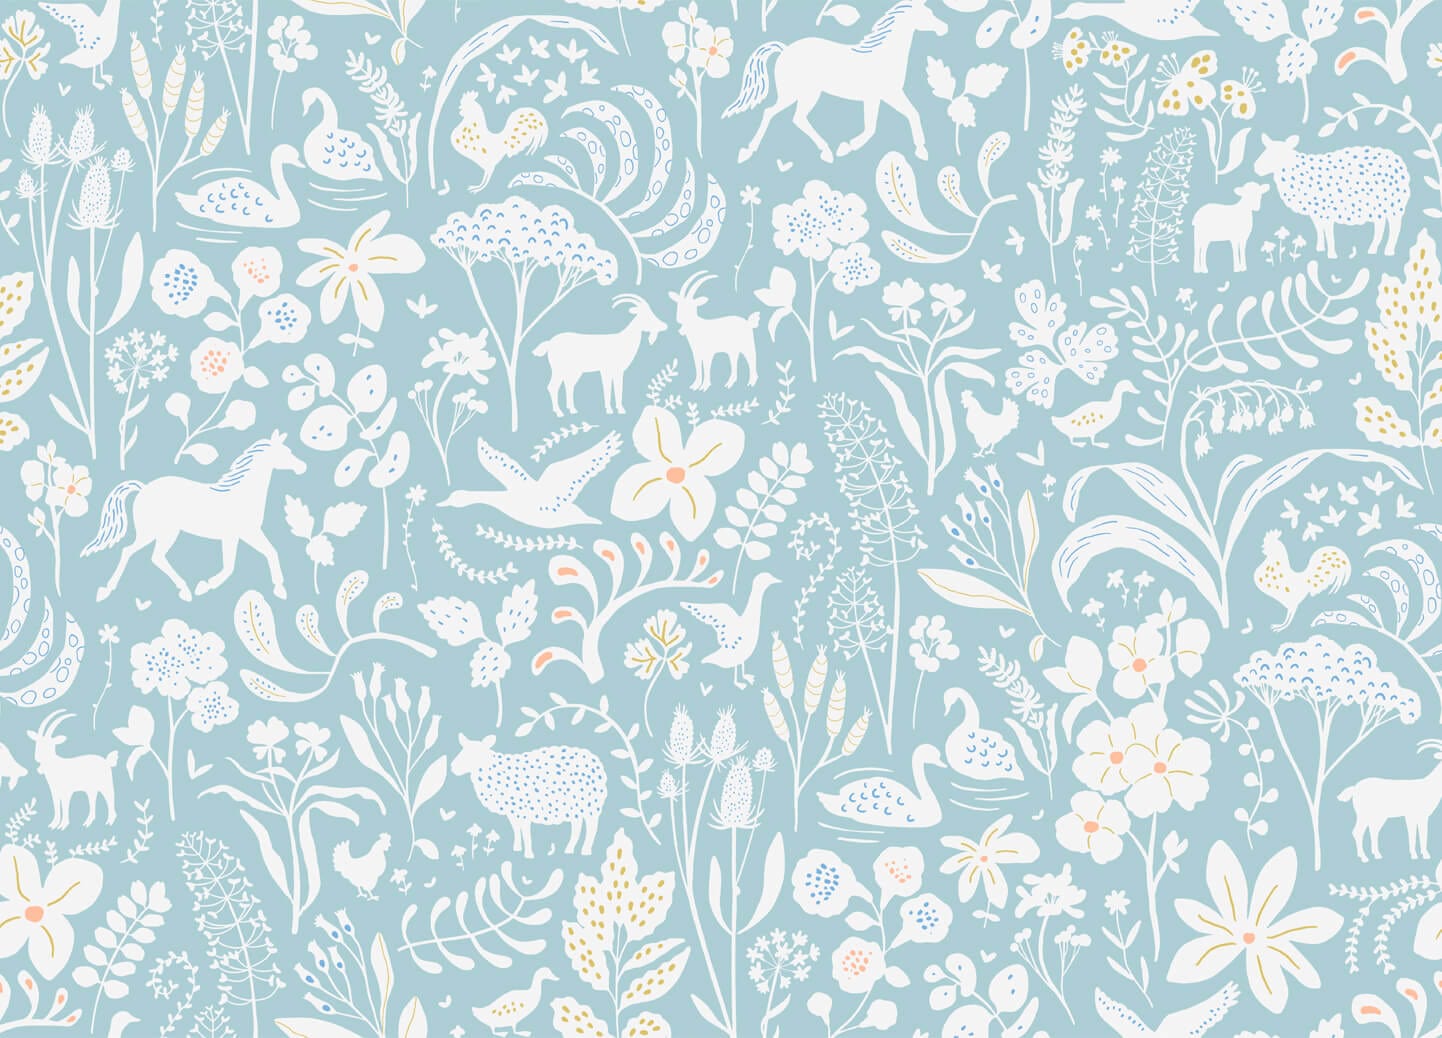 Wallpaper of white flowers, leaves, swans, chickens, deers, ducks with a blue background.